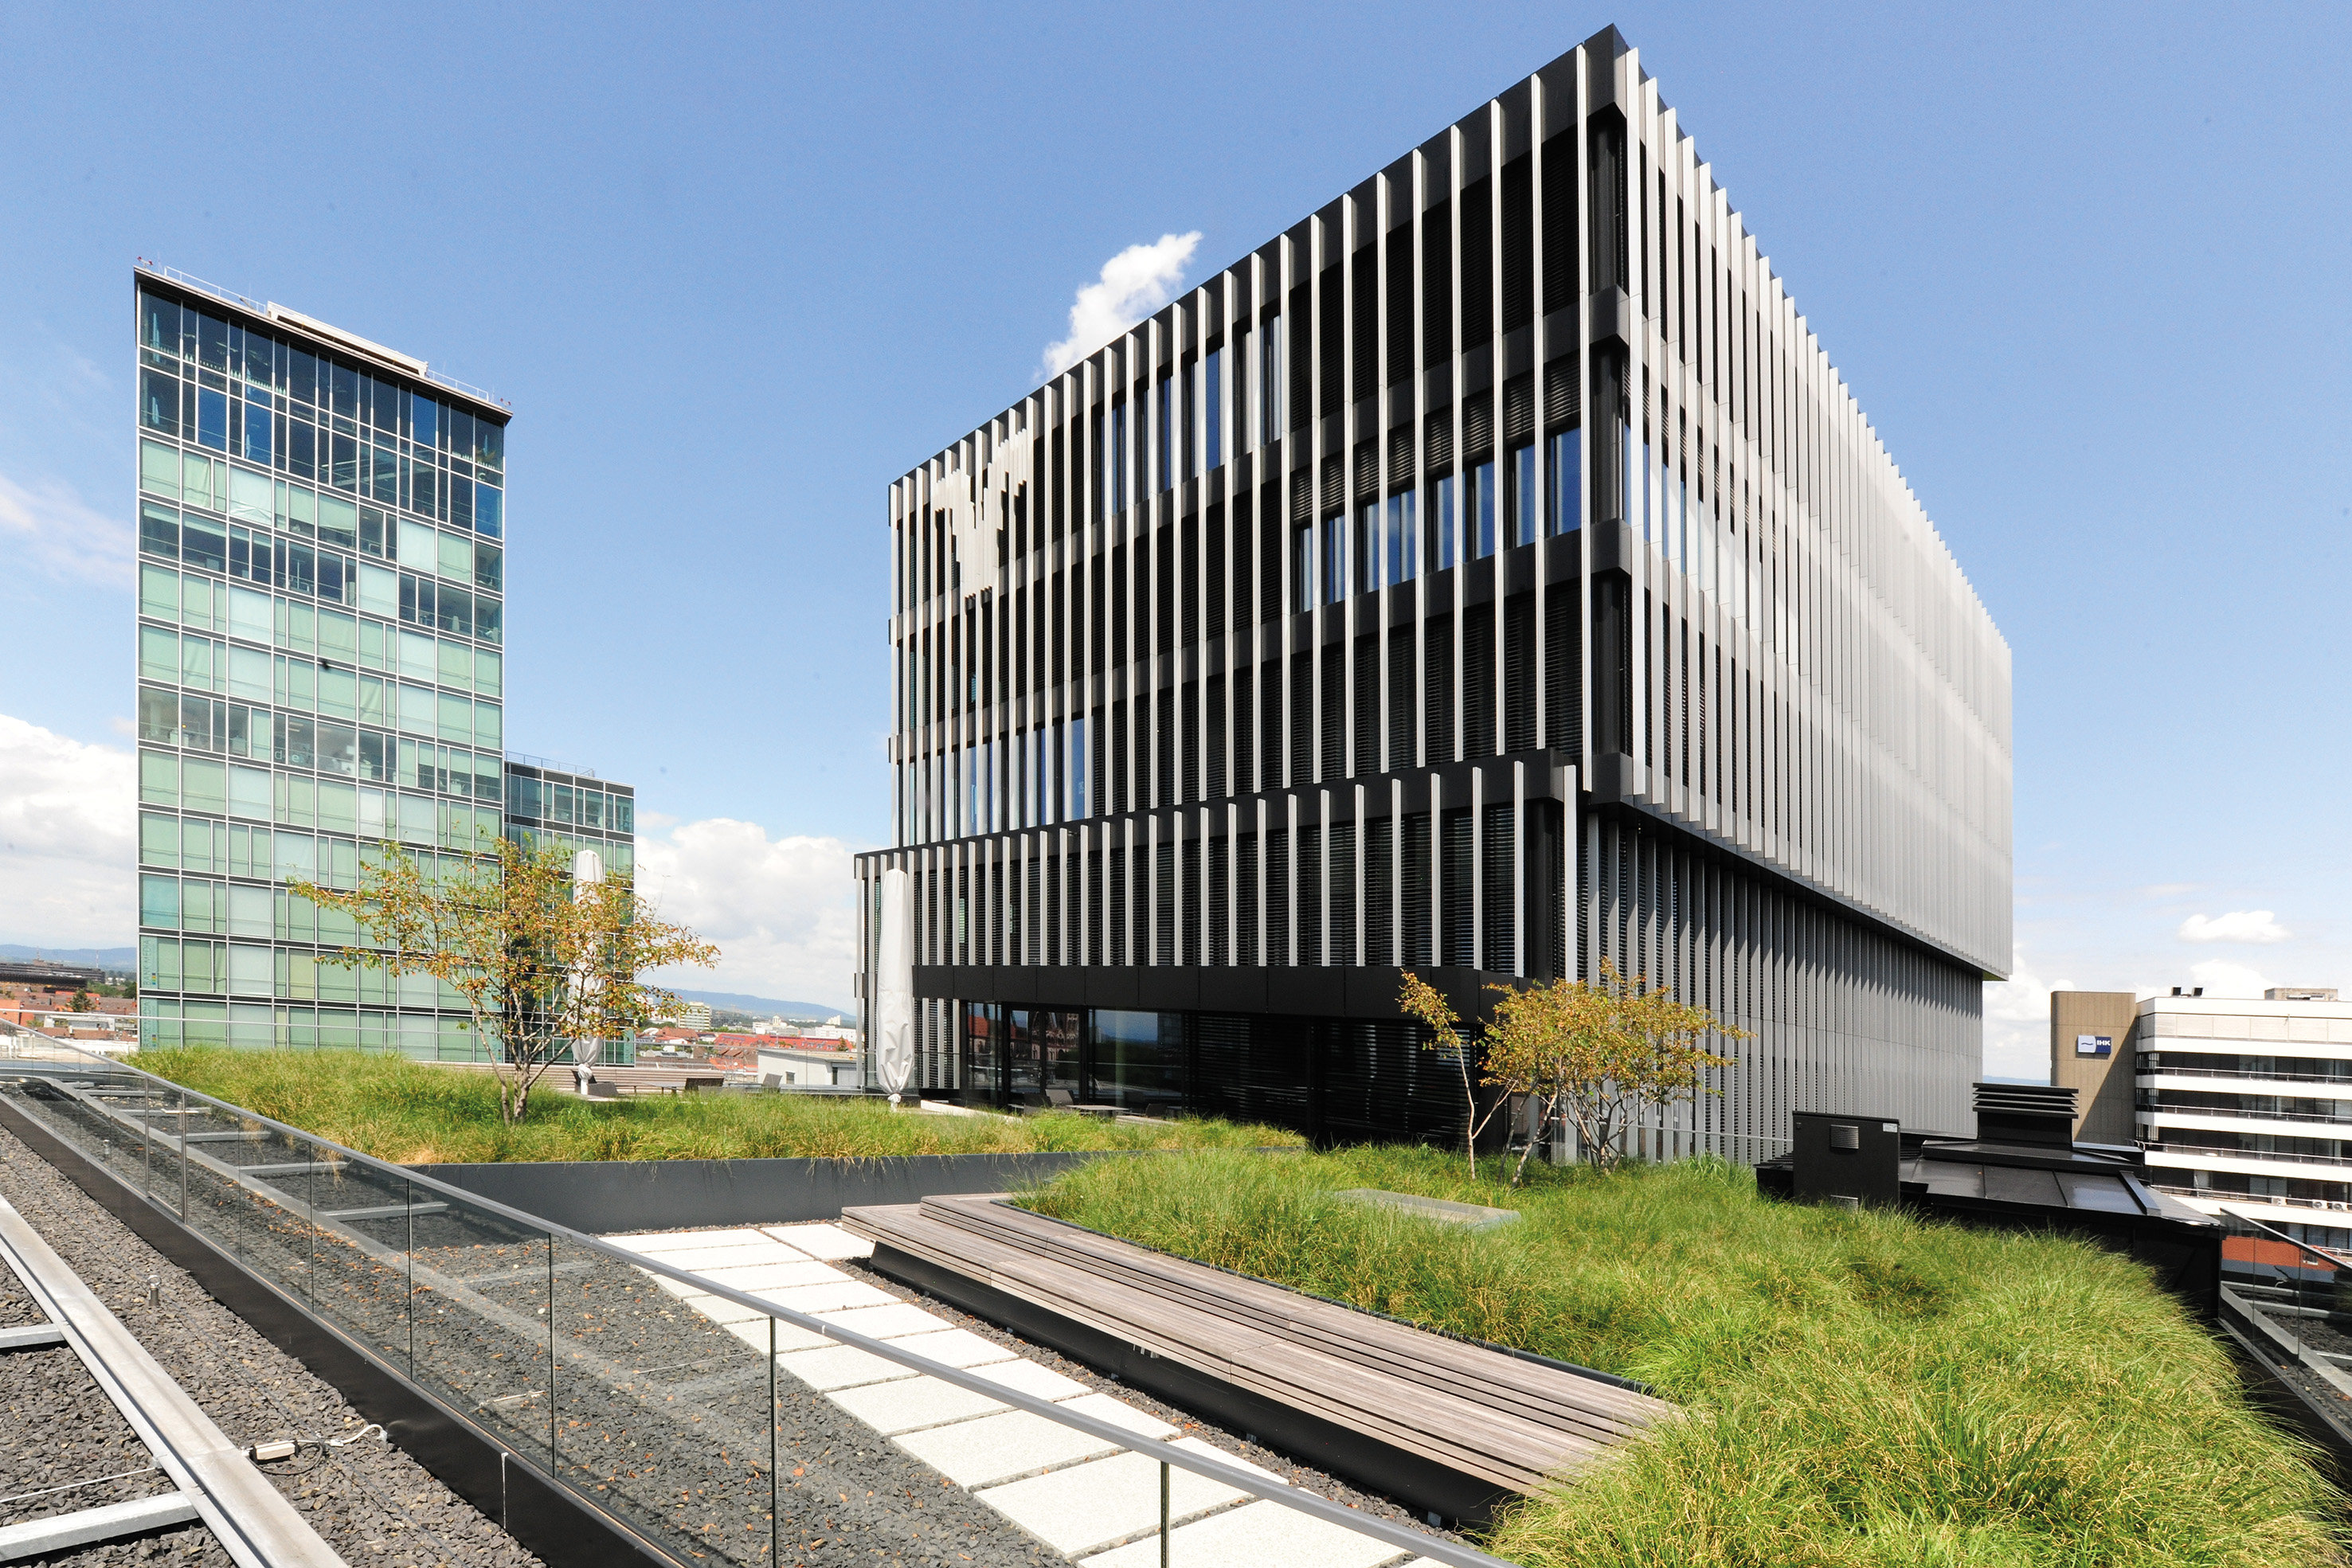 The new Volksbank Freiburg building complex impresses with its creative overall concept and its utilisation as a multifunctional area.